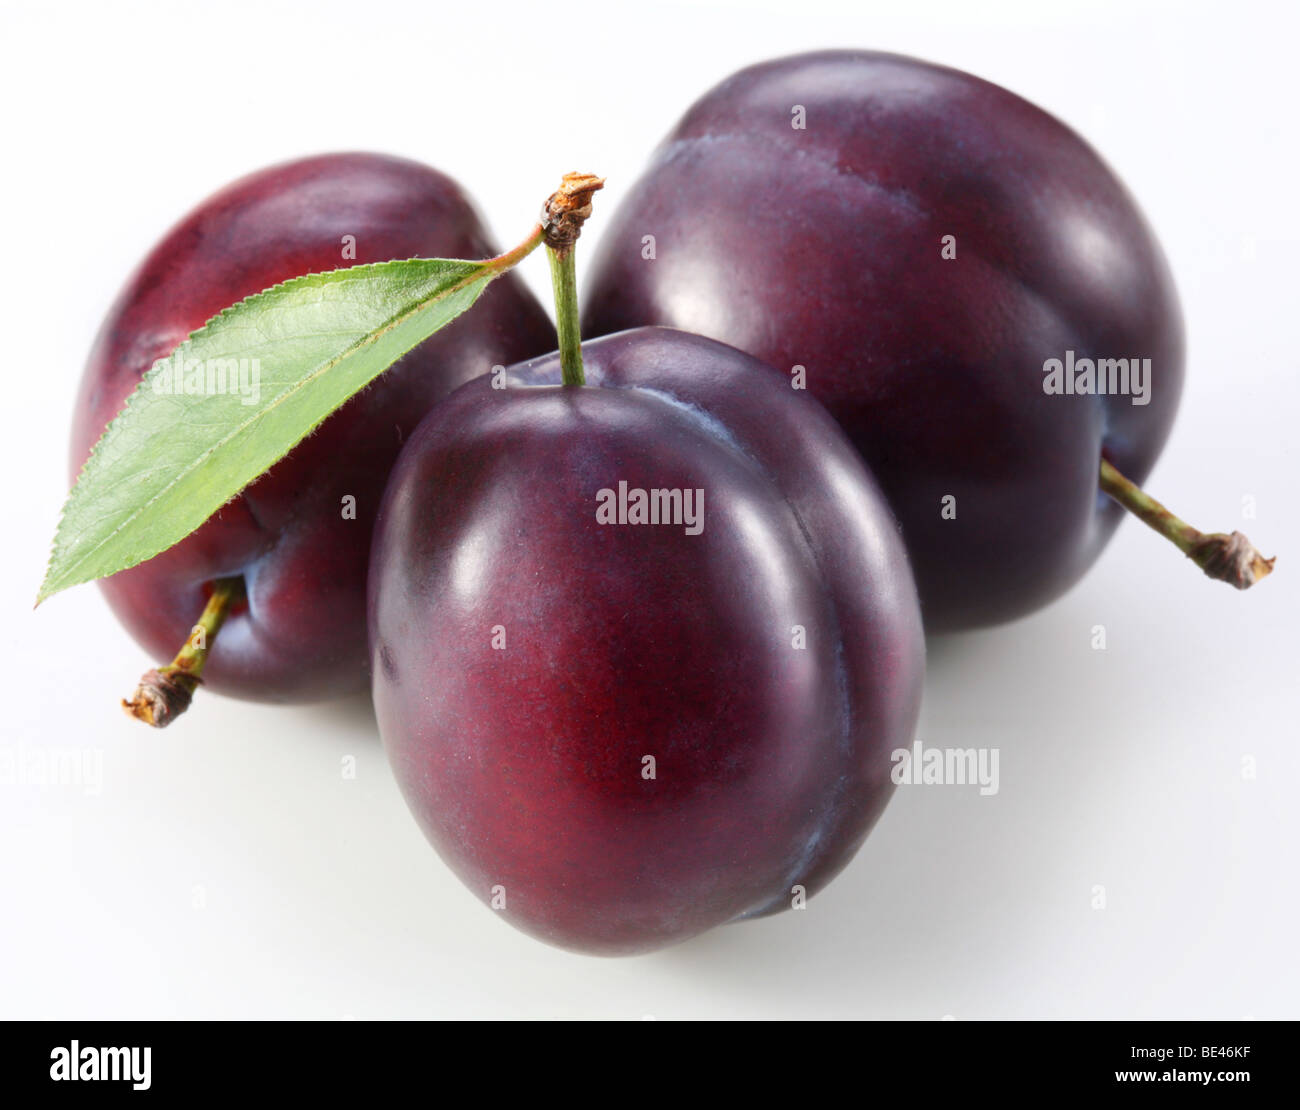 Plums on a white background Stock Photo